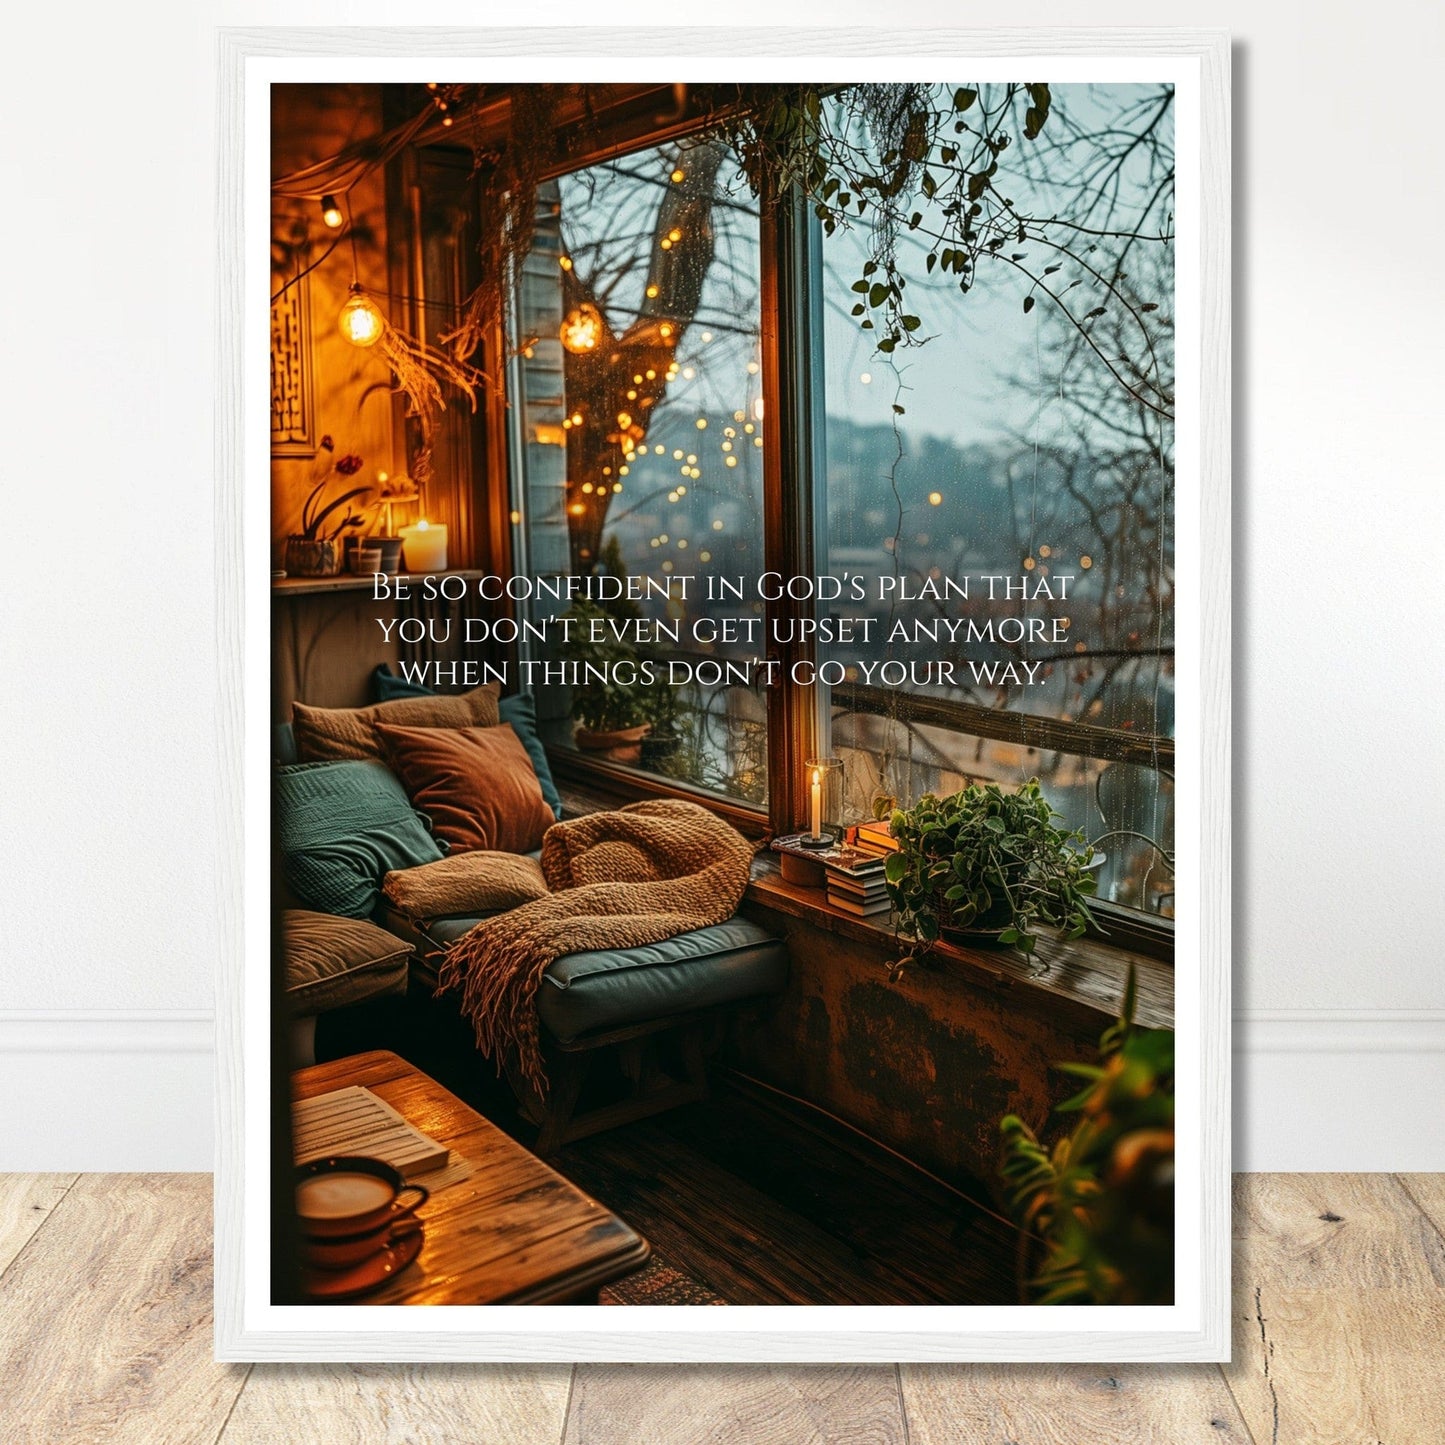 Coffee With My Father Print Material 45x60 cm / 18x24″ / Premium Matte Paper Wooden Framed Poster / White frame Premium Matte Paper Wooden Framed Poster